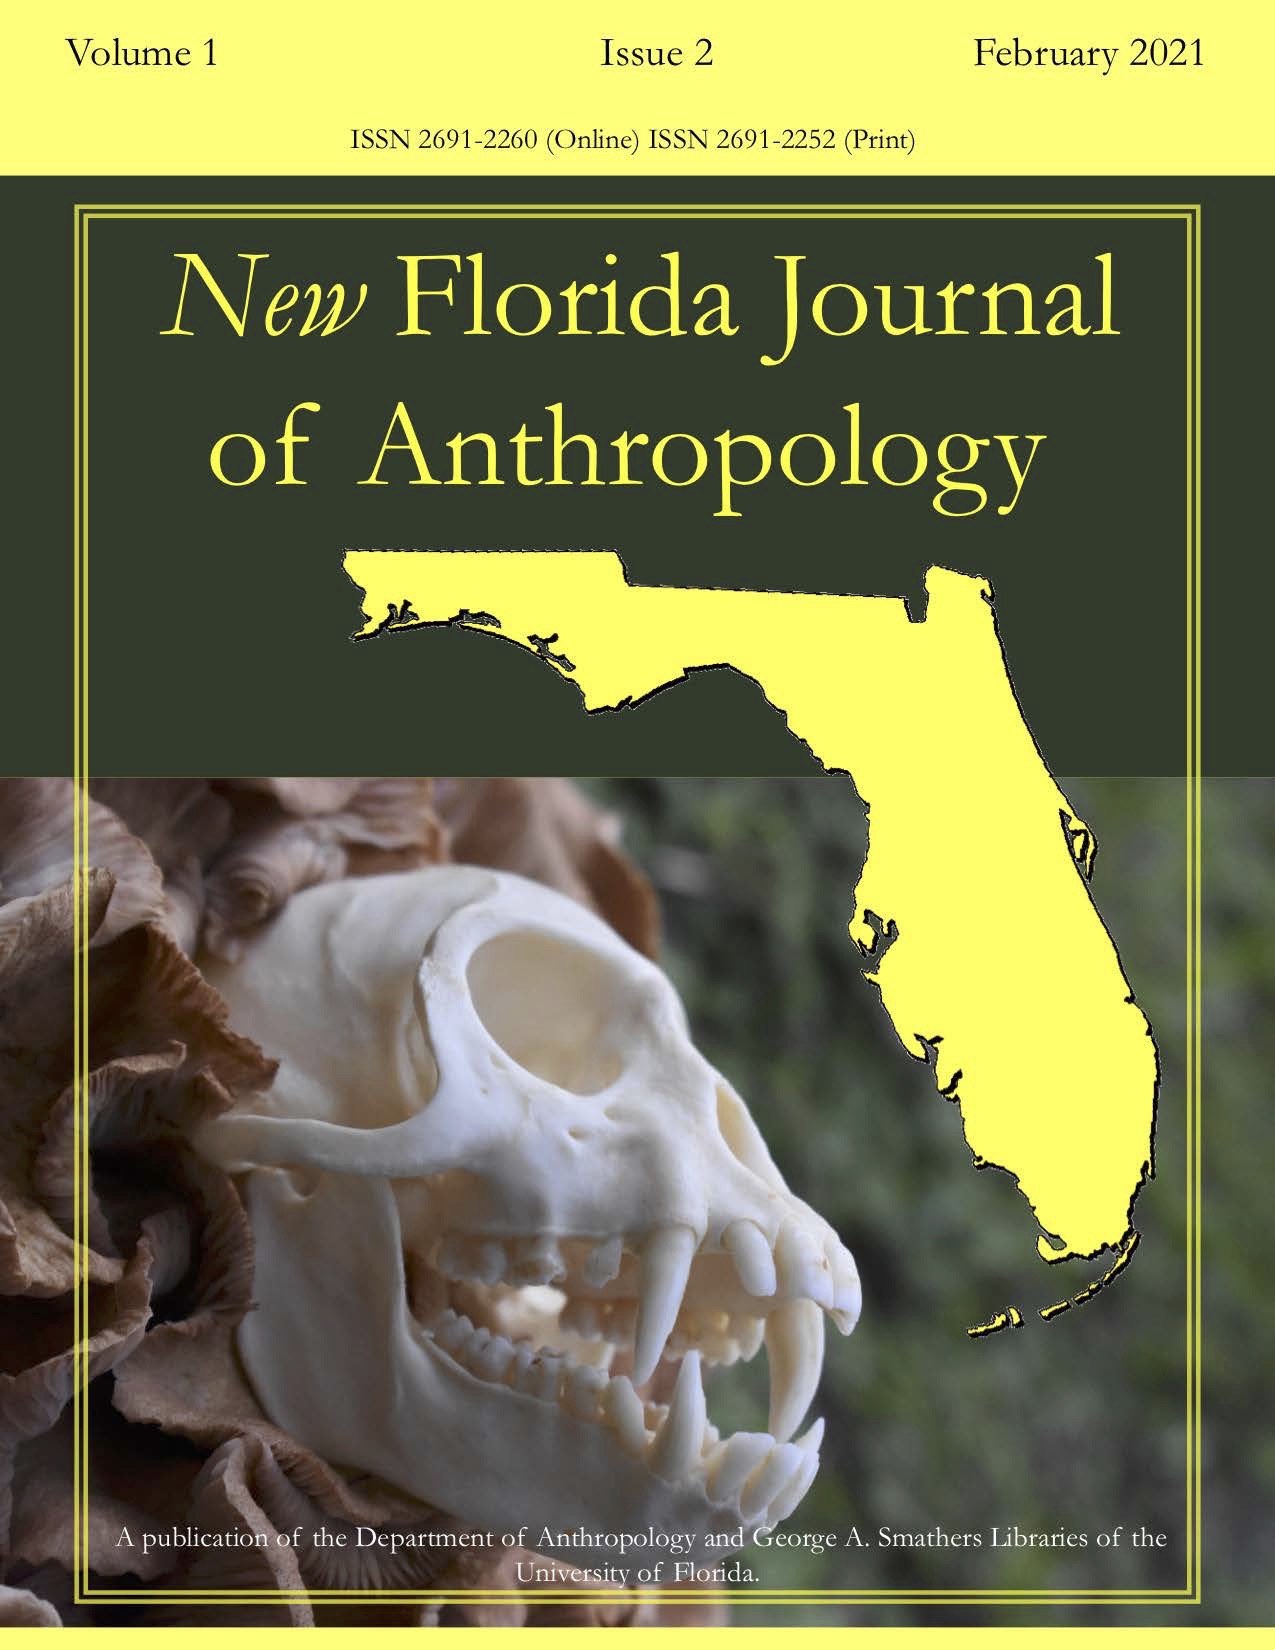 NFJA Florida outline logo in yellow overlaying an image of a male crab-eating macaque (Macaca fascicularis) skull against a backdrop of Armillaria mushrooms.